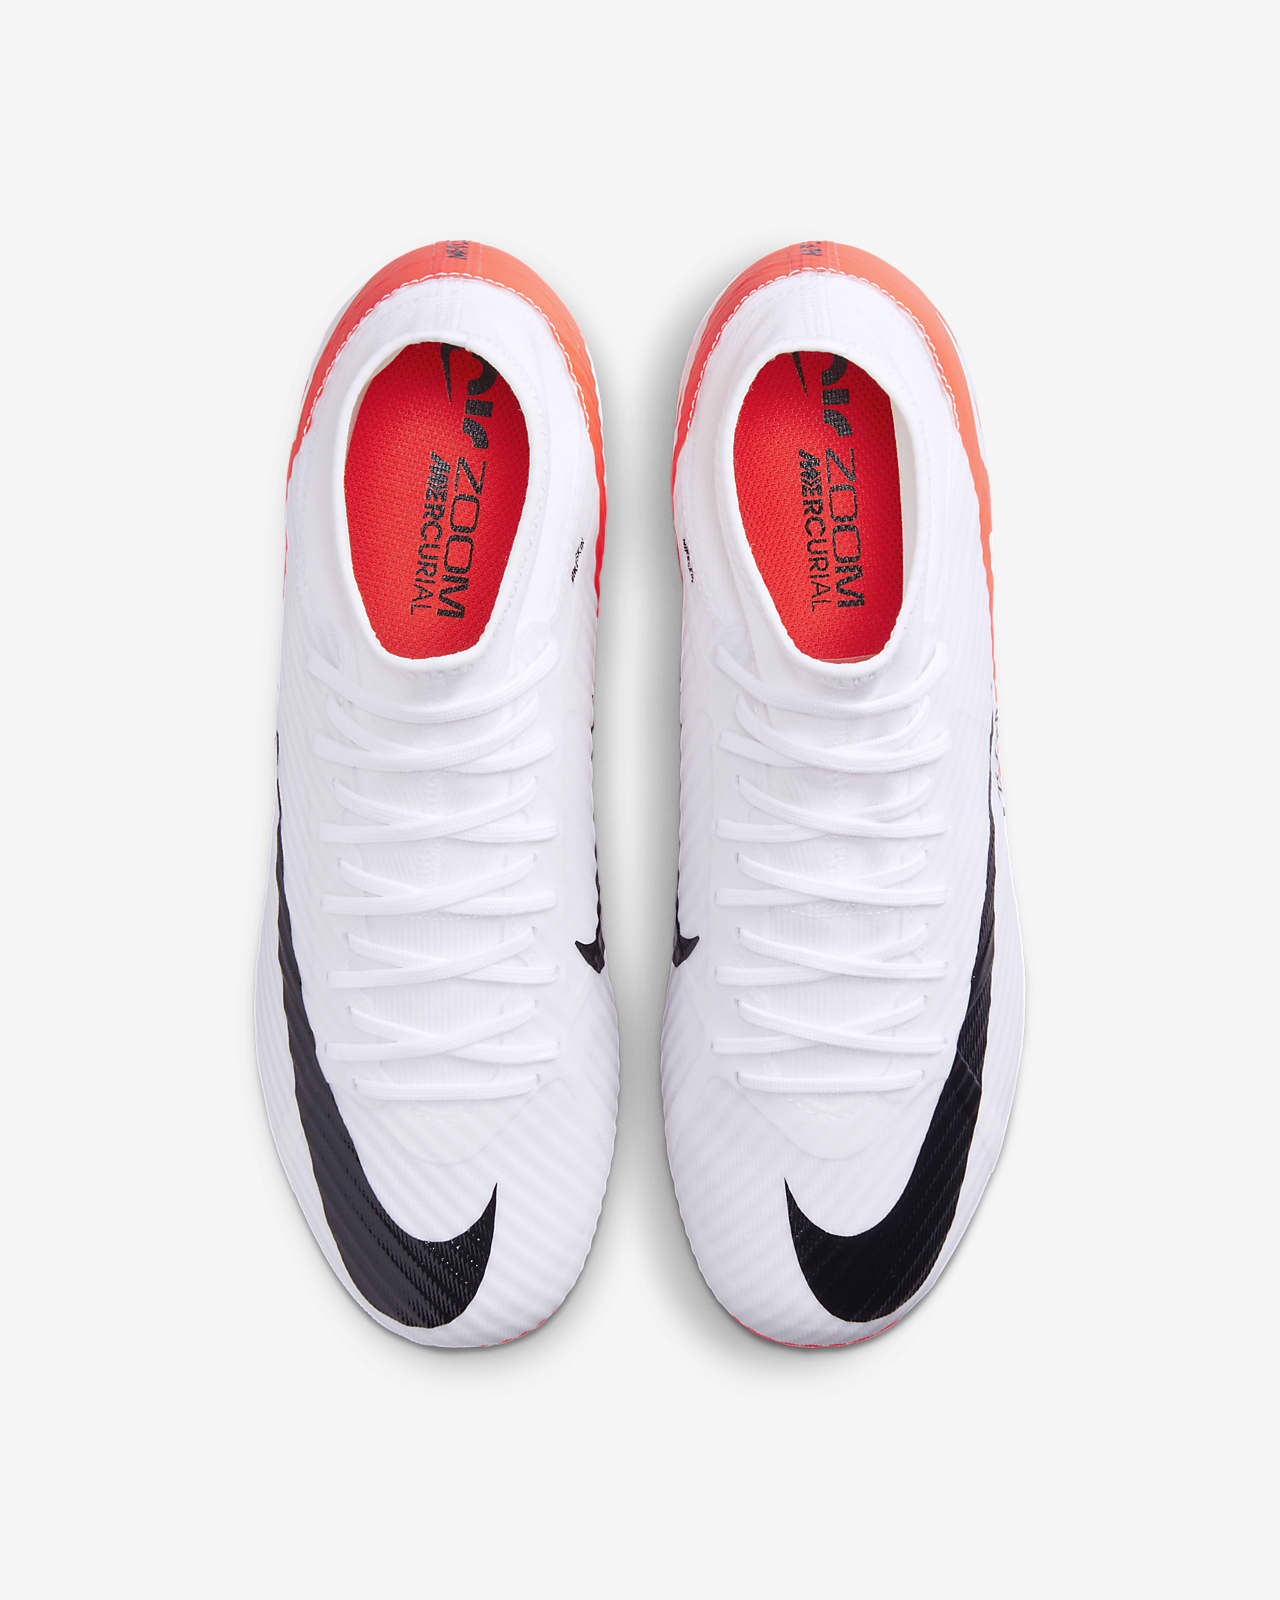 ketting Pest Invloed Nike Mercurial Superfly 9 Academy Multi-Ground Soccer Cleats. Nike.com